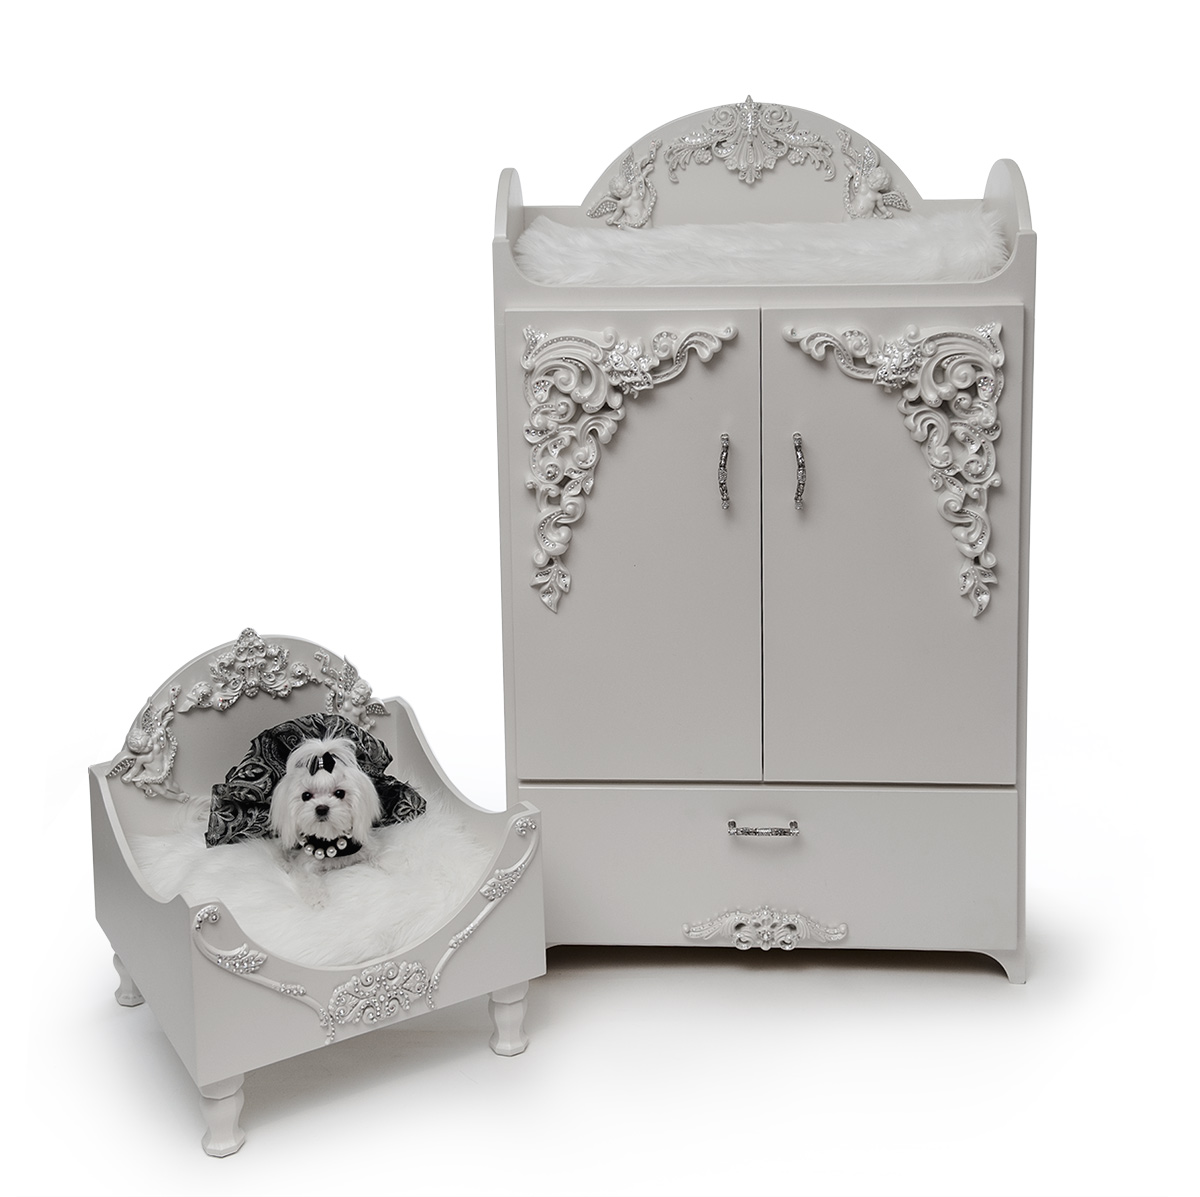 Want to know how to design a space for your dog? Here's my pick for DIY armoire from Yvette Ruta. Love.